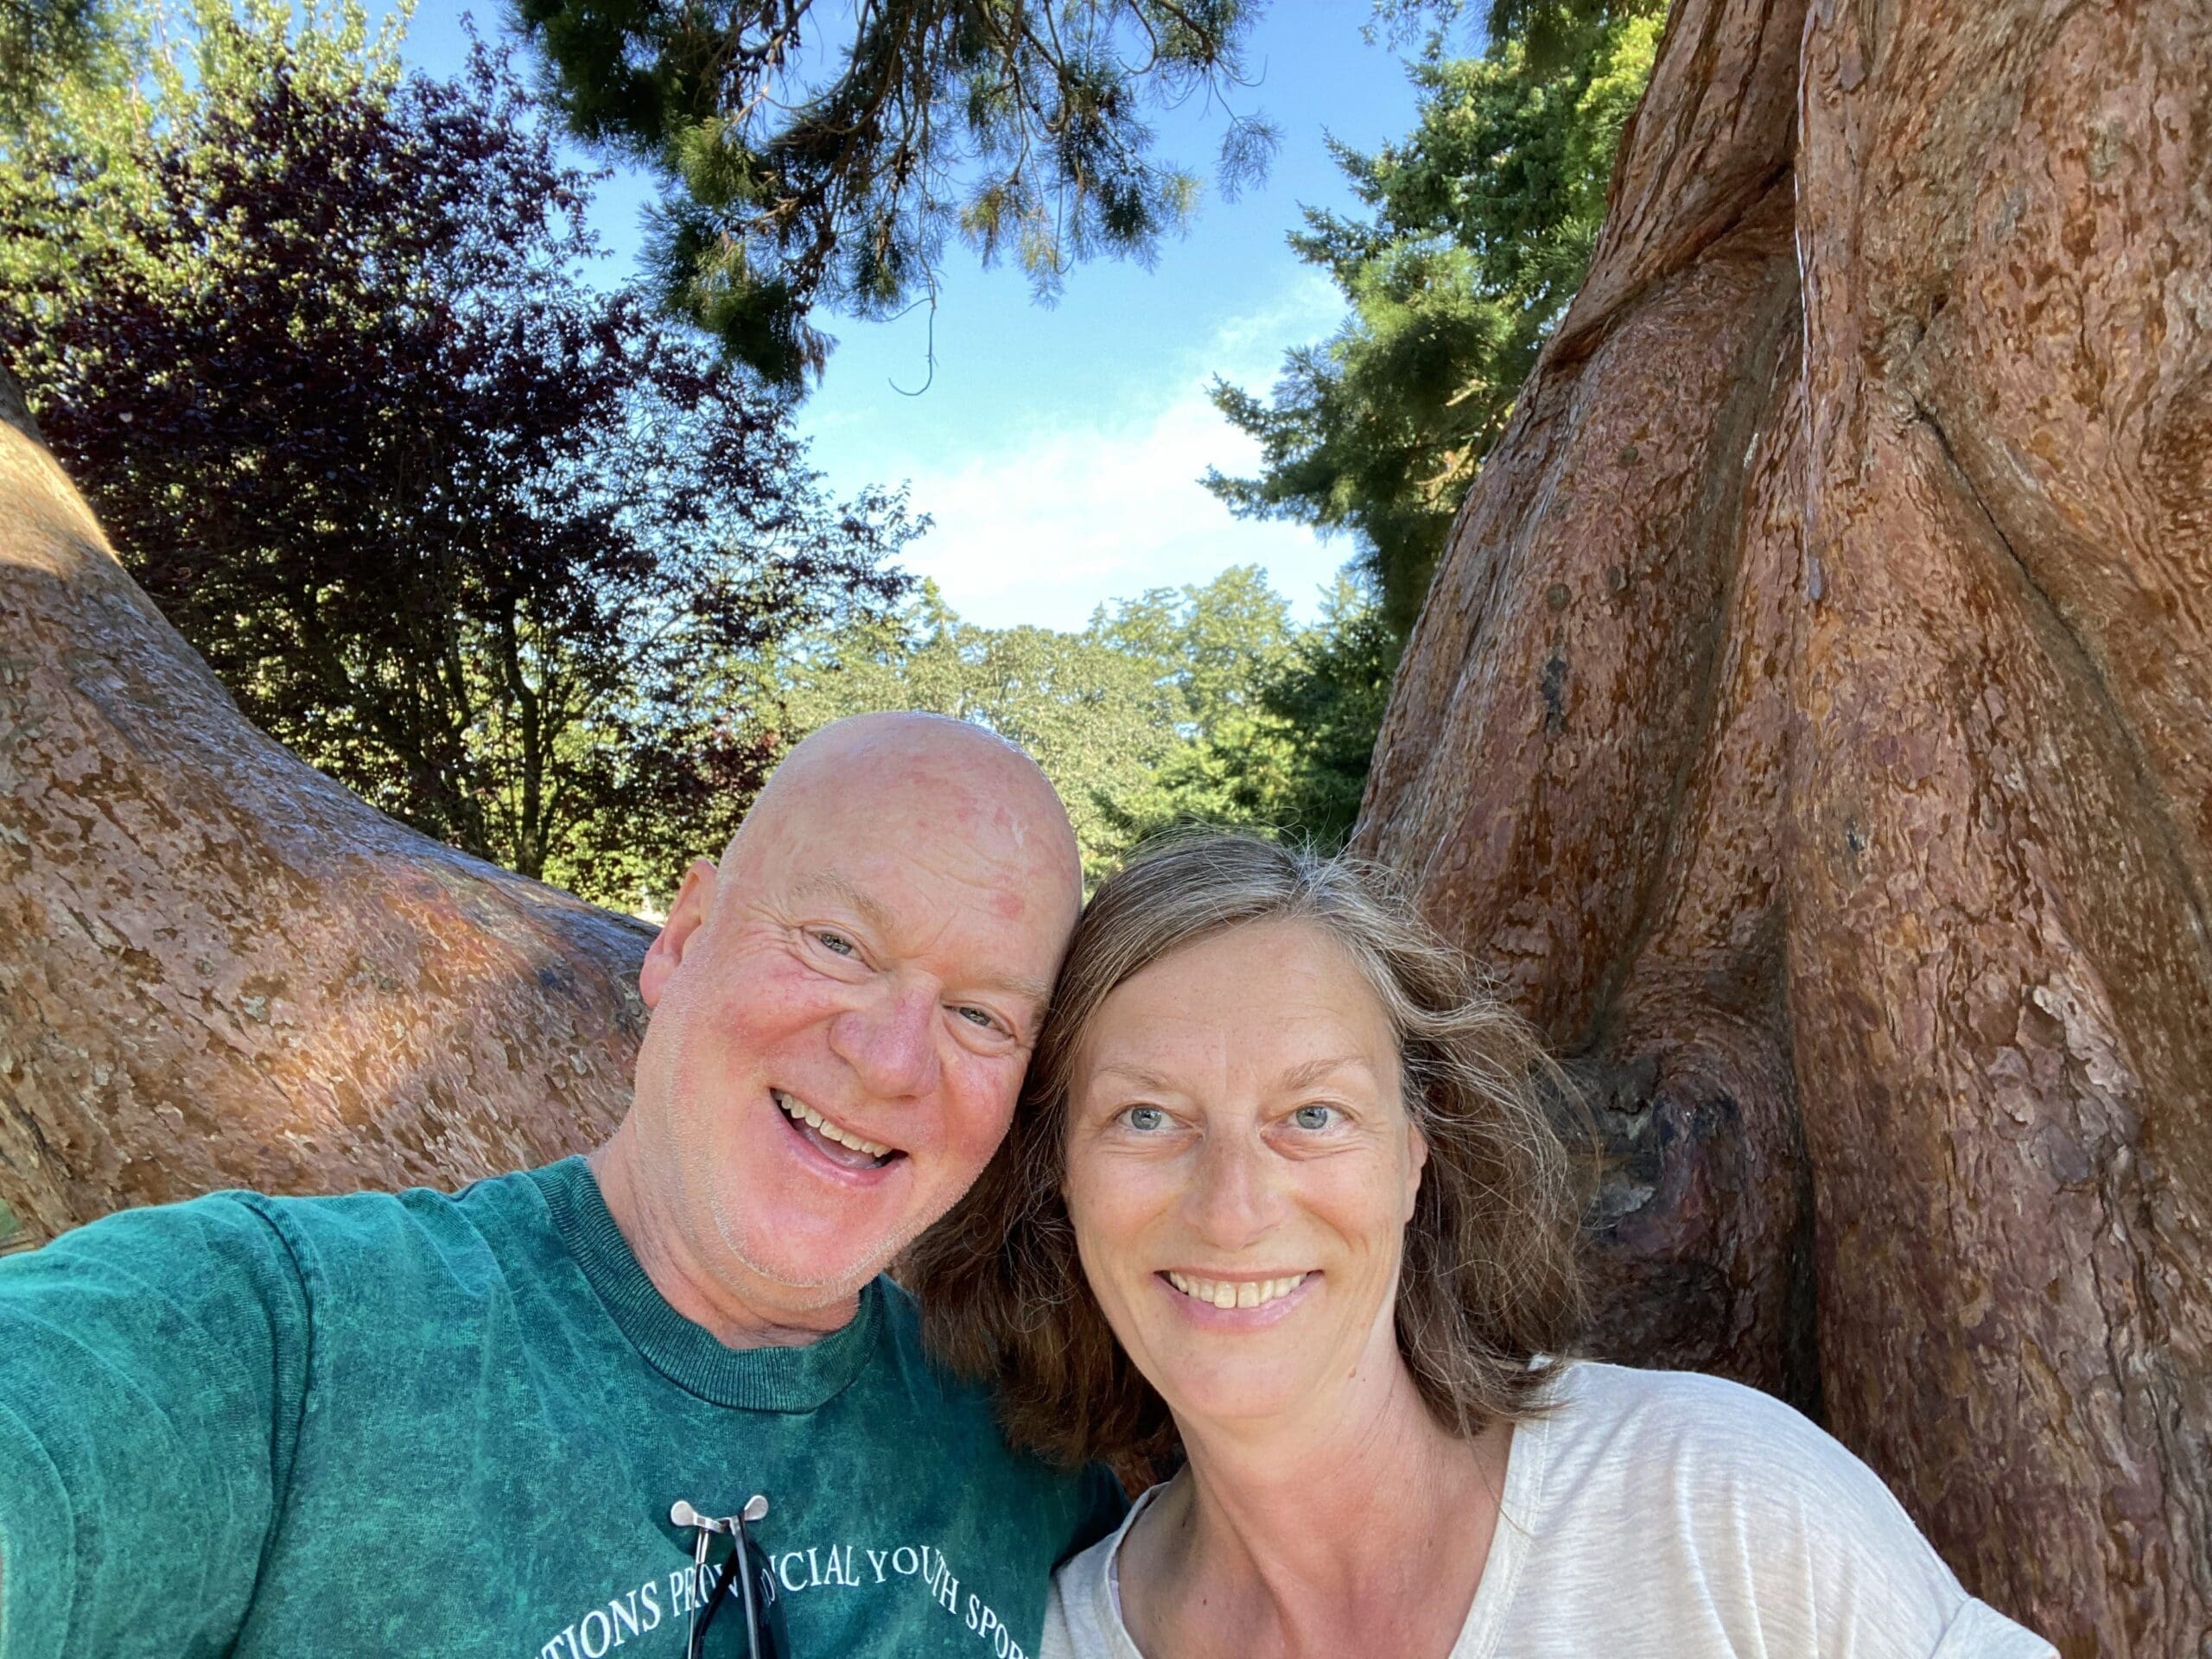 Gail and Paul posing with the Sequoia Tree located in Beacon Hill Park Victoria BC